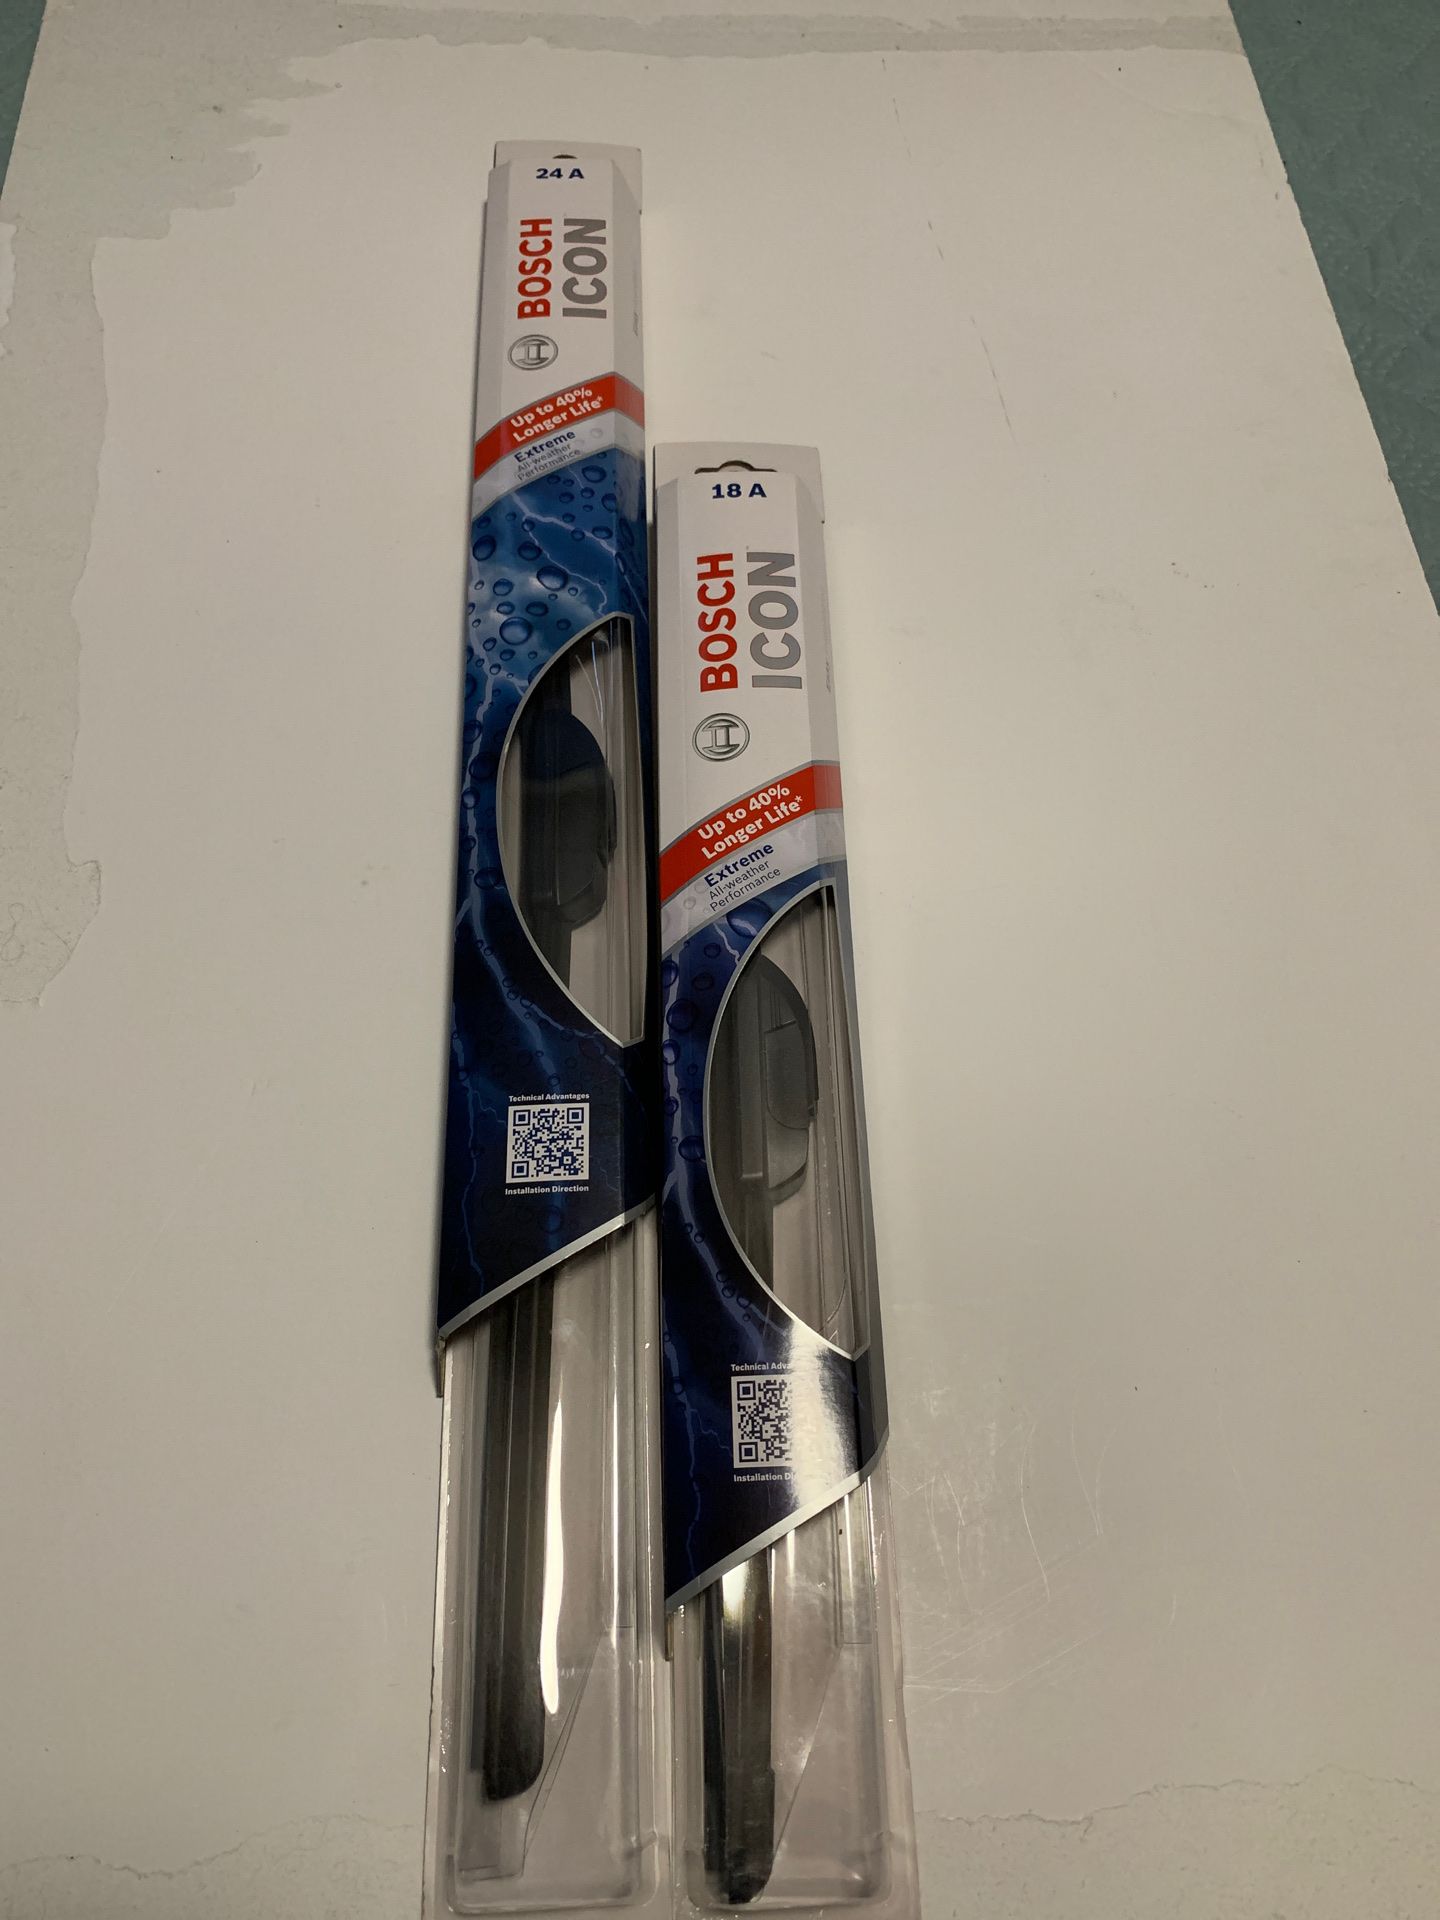 Bosch Icon car windshield wipers 24A /18A